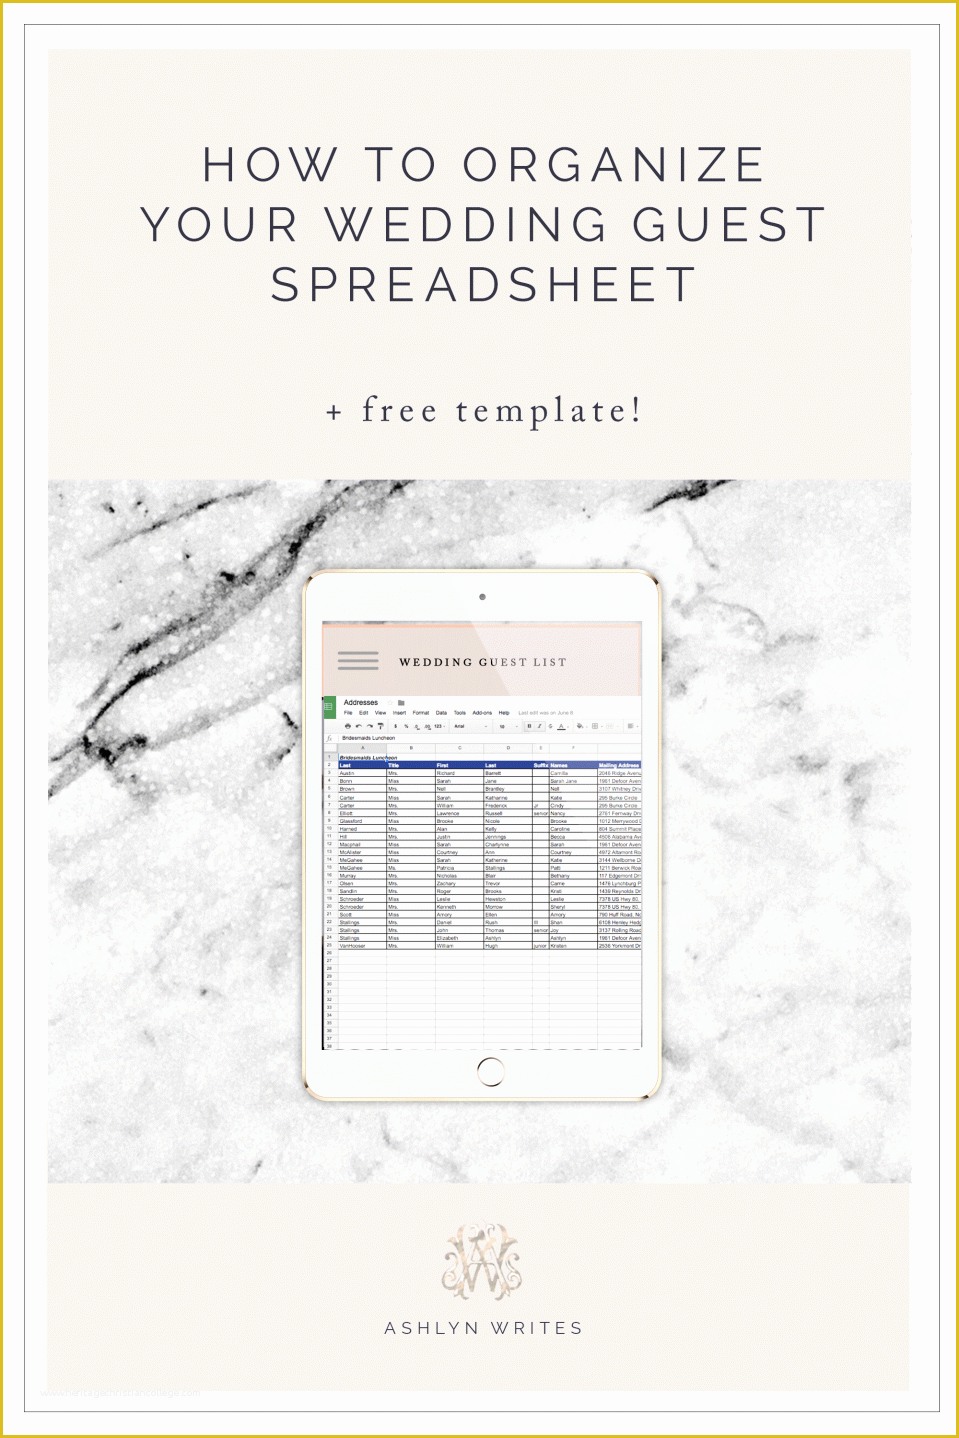 Free Wedding Guest List Template Of How to organize A Wedding Guest List Spreadsheet Free